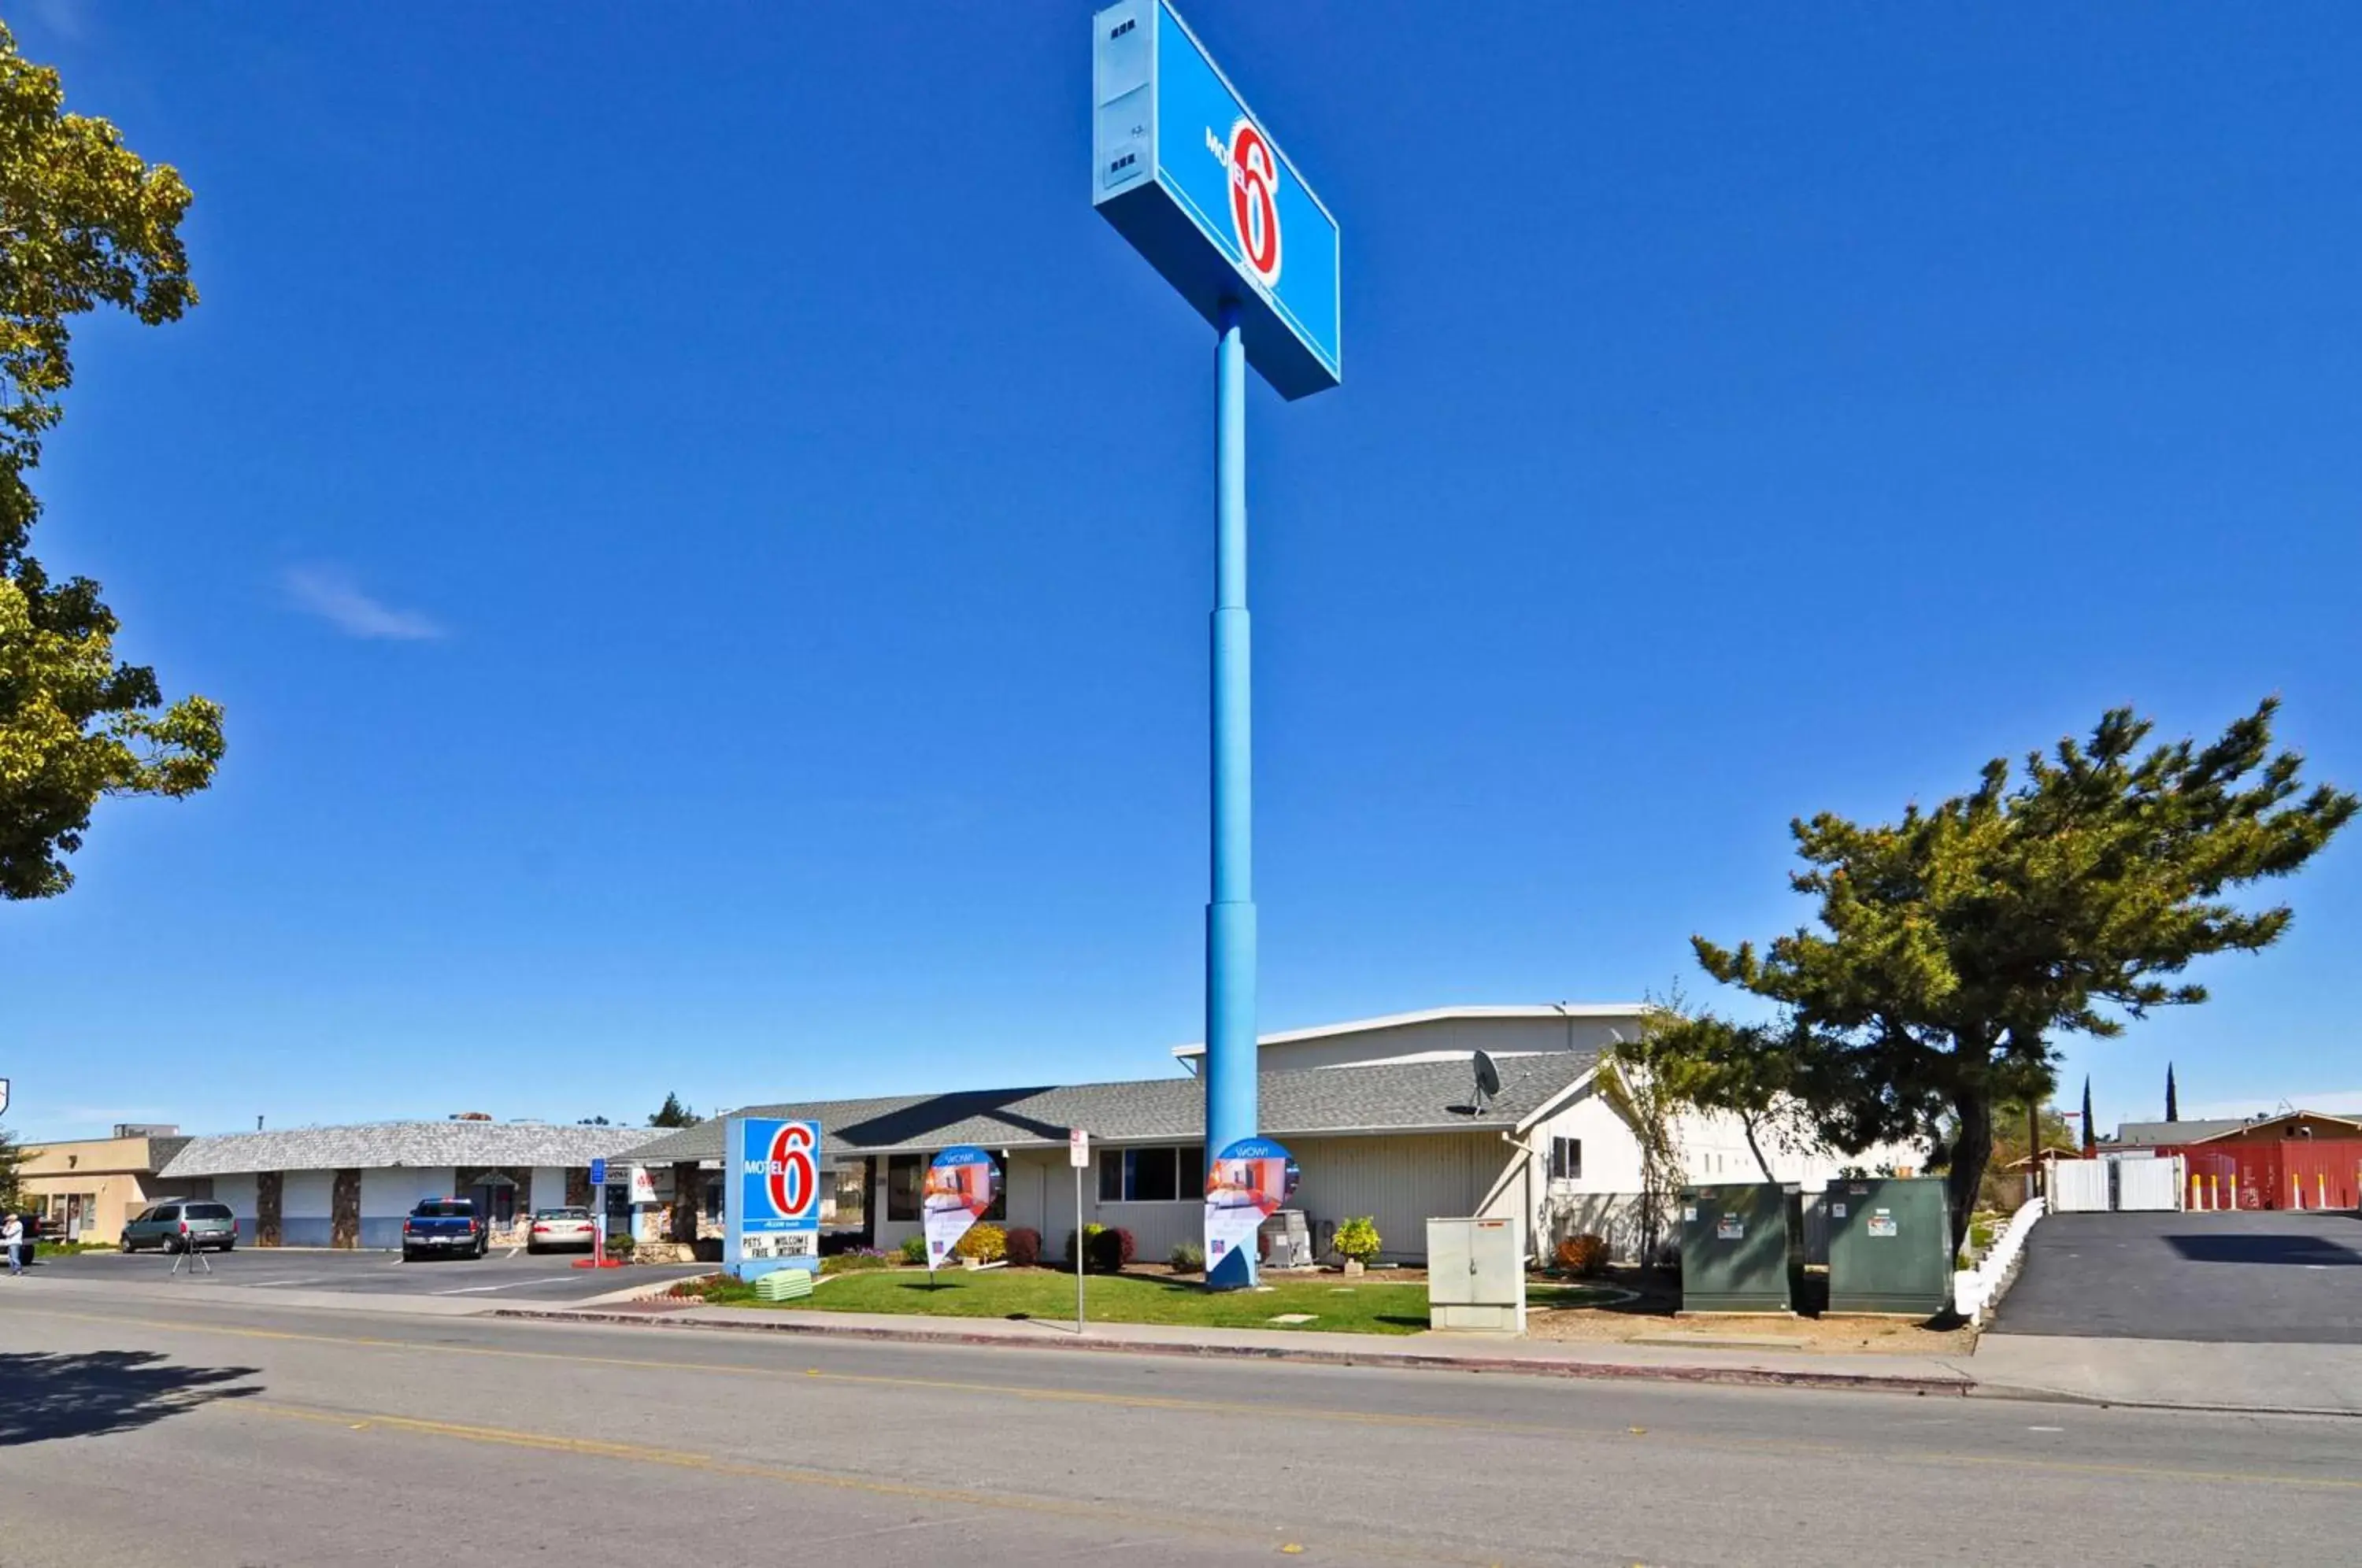 Property building, Nearby Landmark in Motel 6-Willows, CA